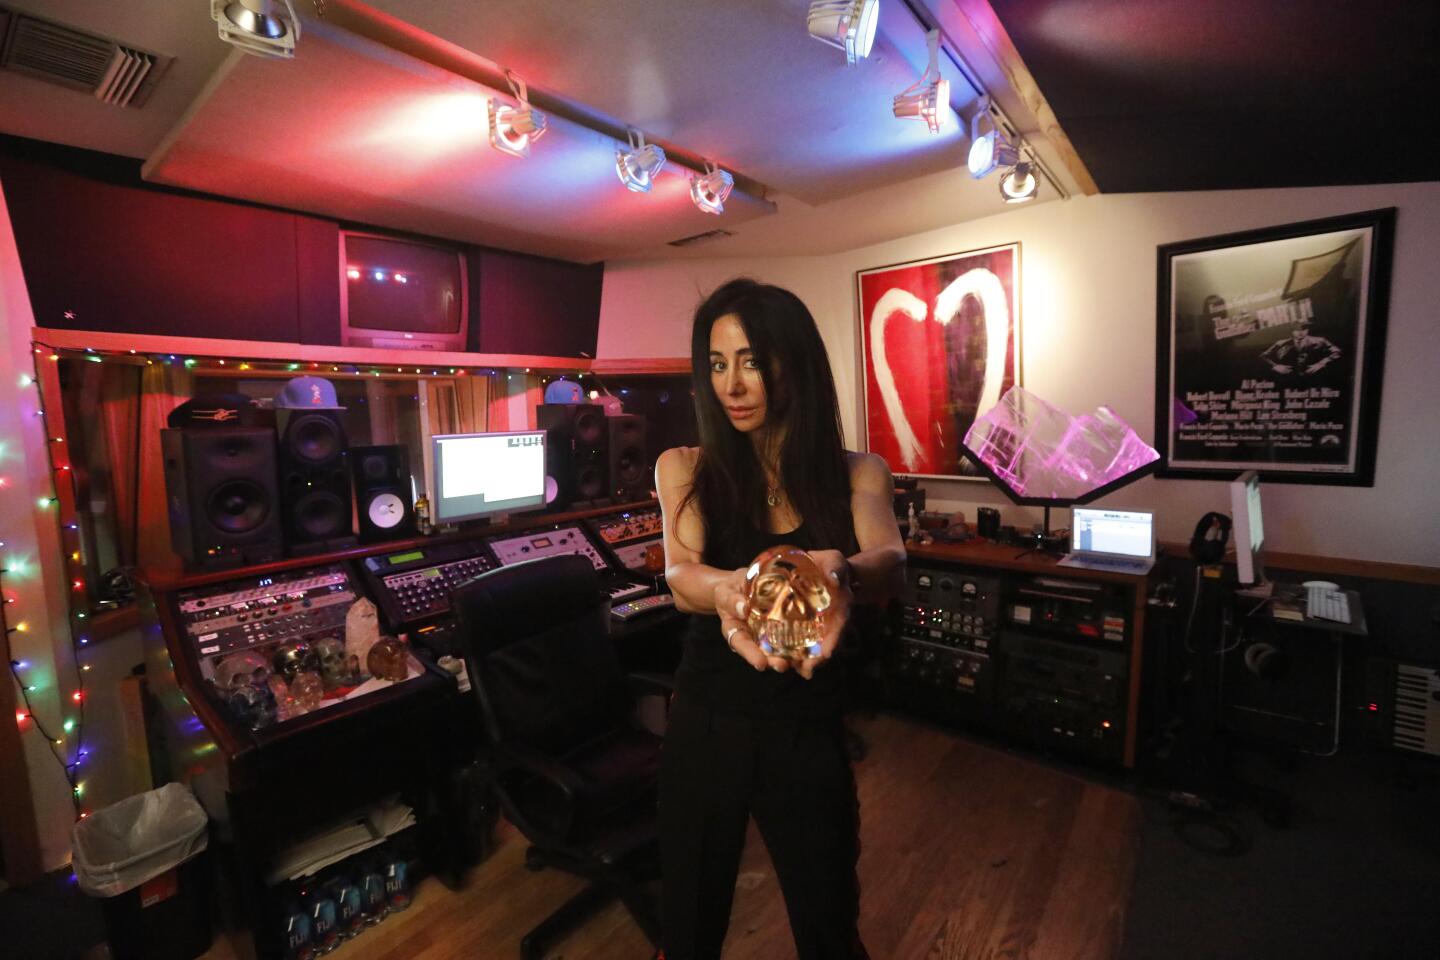 SANTA MONICA, CA - OCTOBER 18, 2019 - - Songwriter and producer Antonina Armato holds a crystal skull inside her recording studio which is her favorite room at Rock Mafia Studio in Santa Monica on October 18, 2019. “This is what I love about this space. It attracts people to make music. We built this place to protect the souls of people who come here,” said Armato. Many of her hit songs, including those with Miley Cyrus and Selena Gomez, were recorded in this room. She has navigated a notoriously male-dominated music industry to become arguably the most successful female songwriter, producer, and artist developer in the music business. She has written and produced songs with leading artists such as Zedd, Ariana Grande, Eminem, Miley Cyrus, Marshmello, Ke$ha, Selena Gomez, Migos, Karol G and many others, culminating in over 10 billion streams and over 35 top 10 singles.(Genaro Molina / Los Angeles Times)